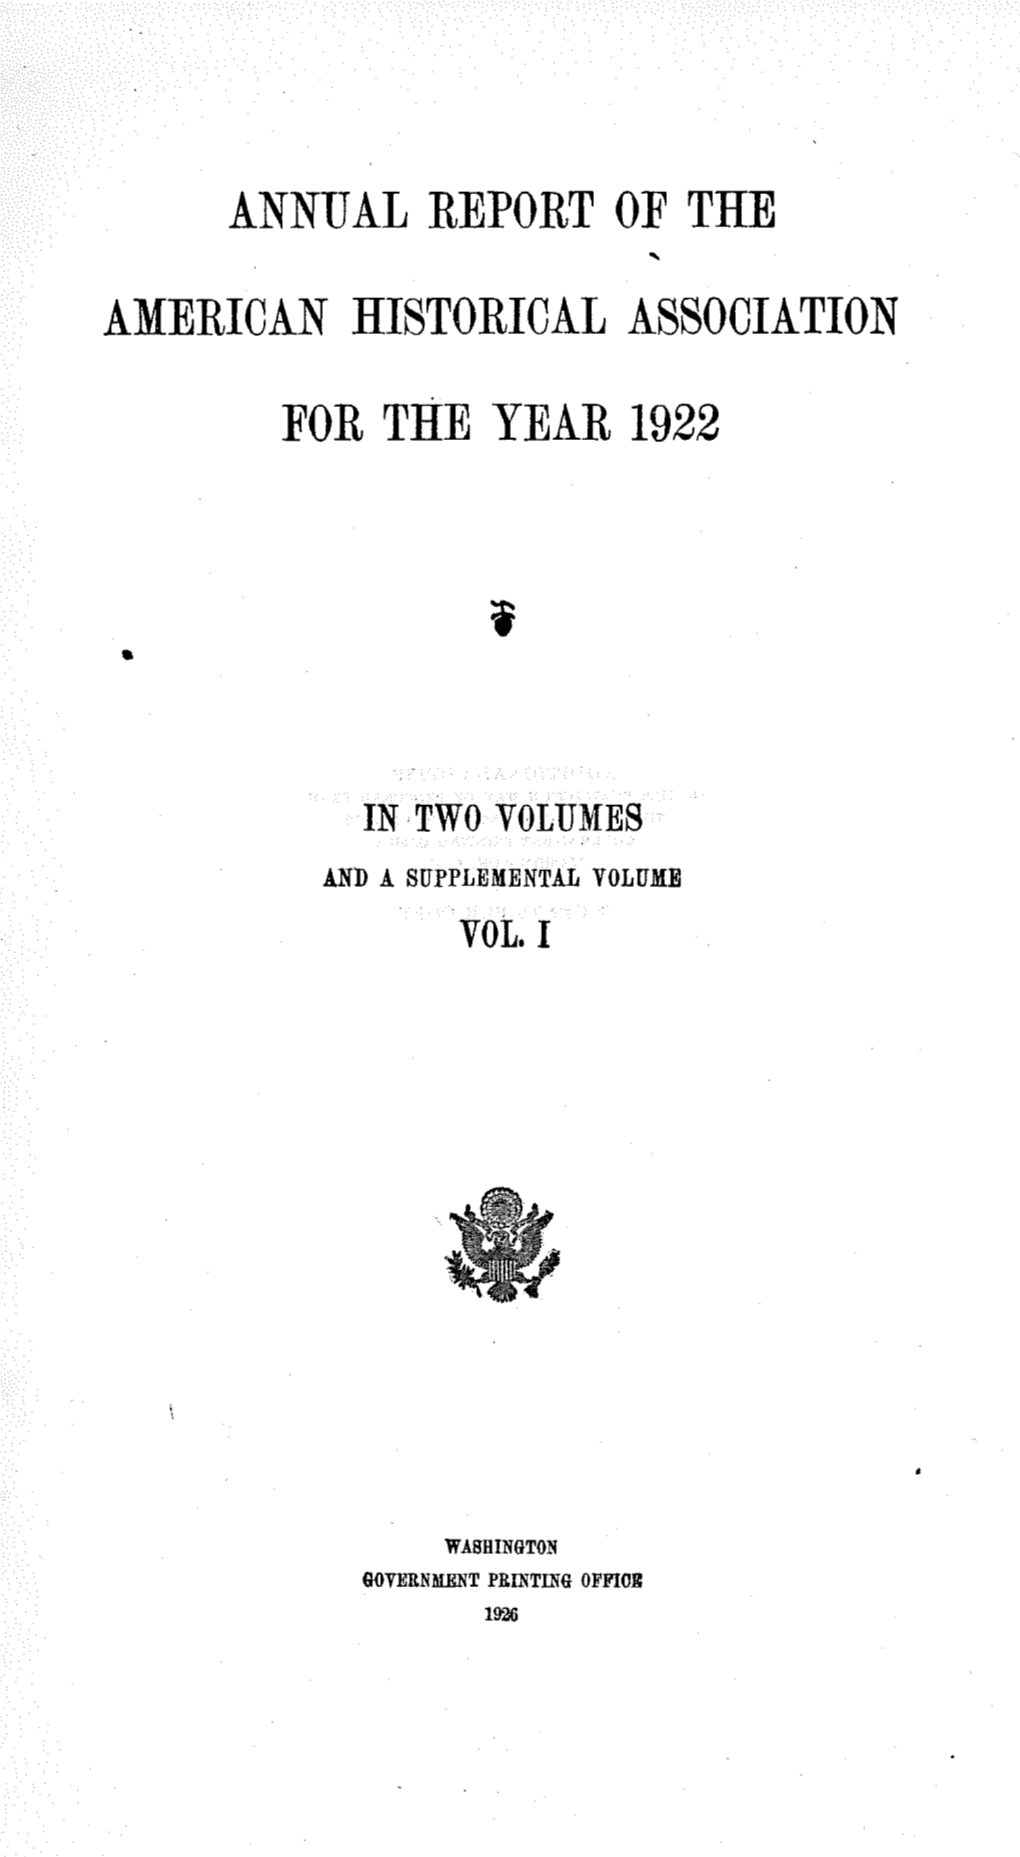 Annual Report of the American Historical Association, 1920-1922, Vol